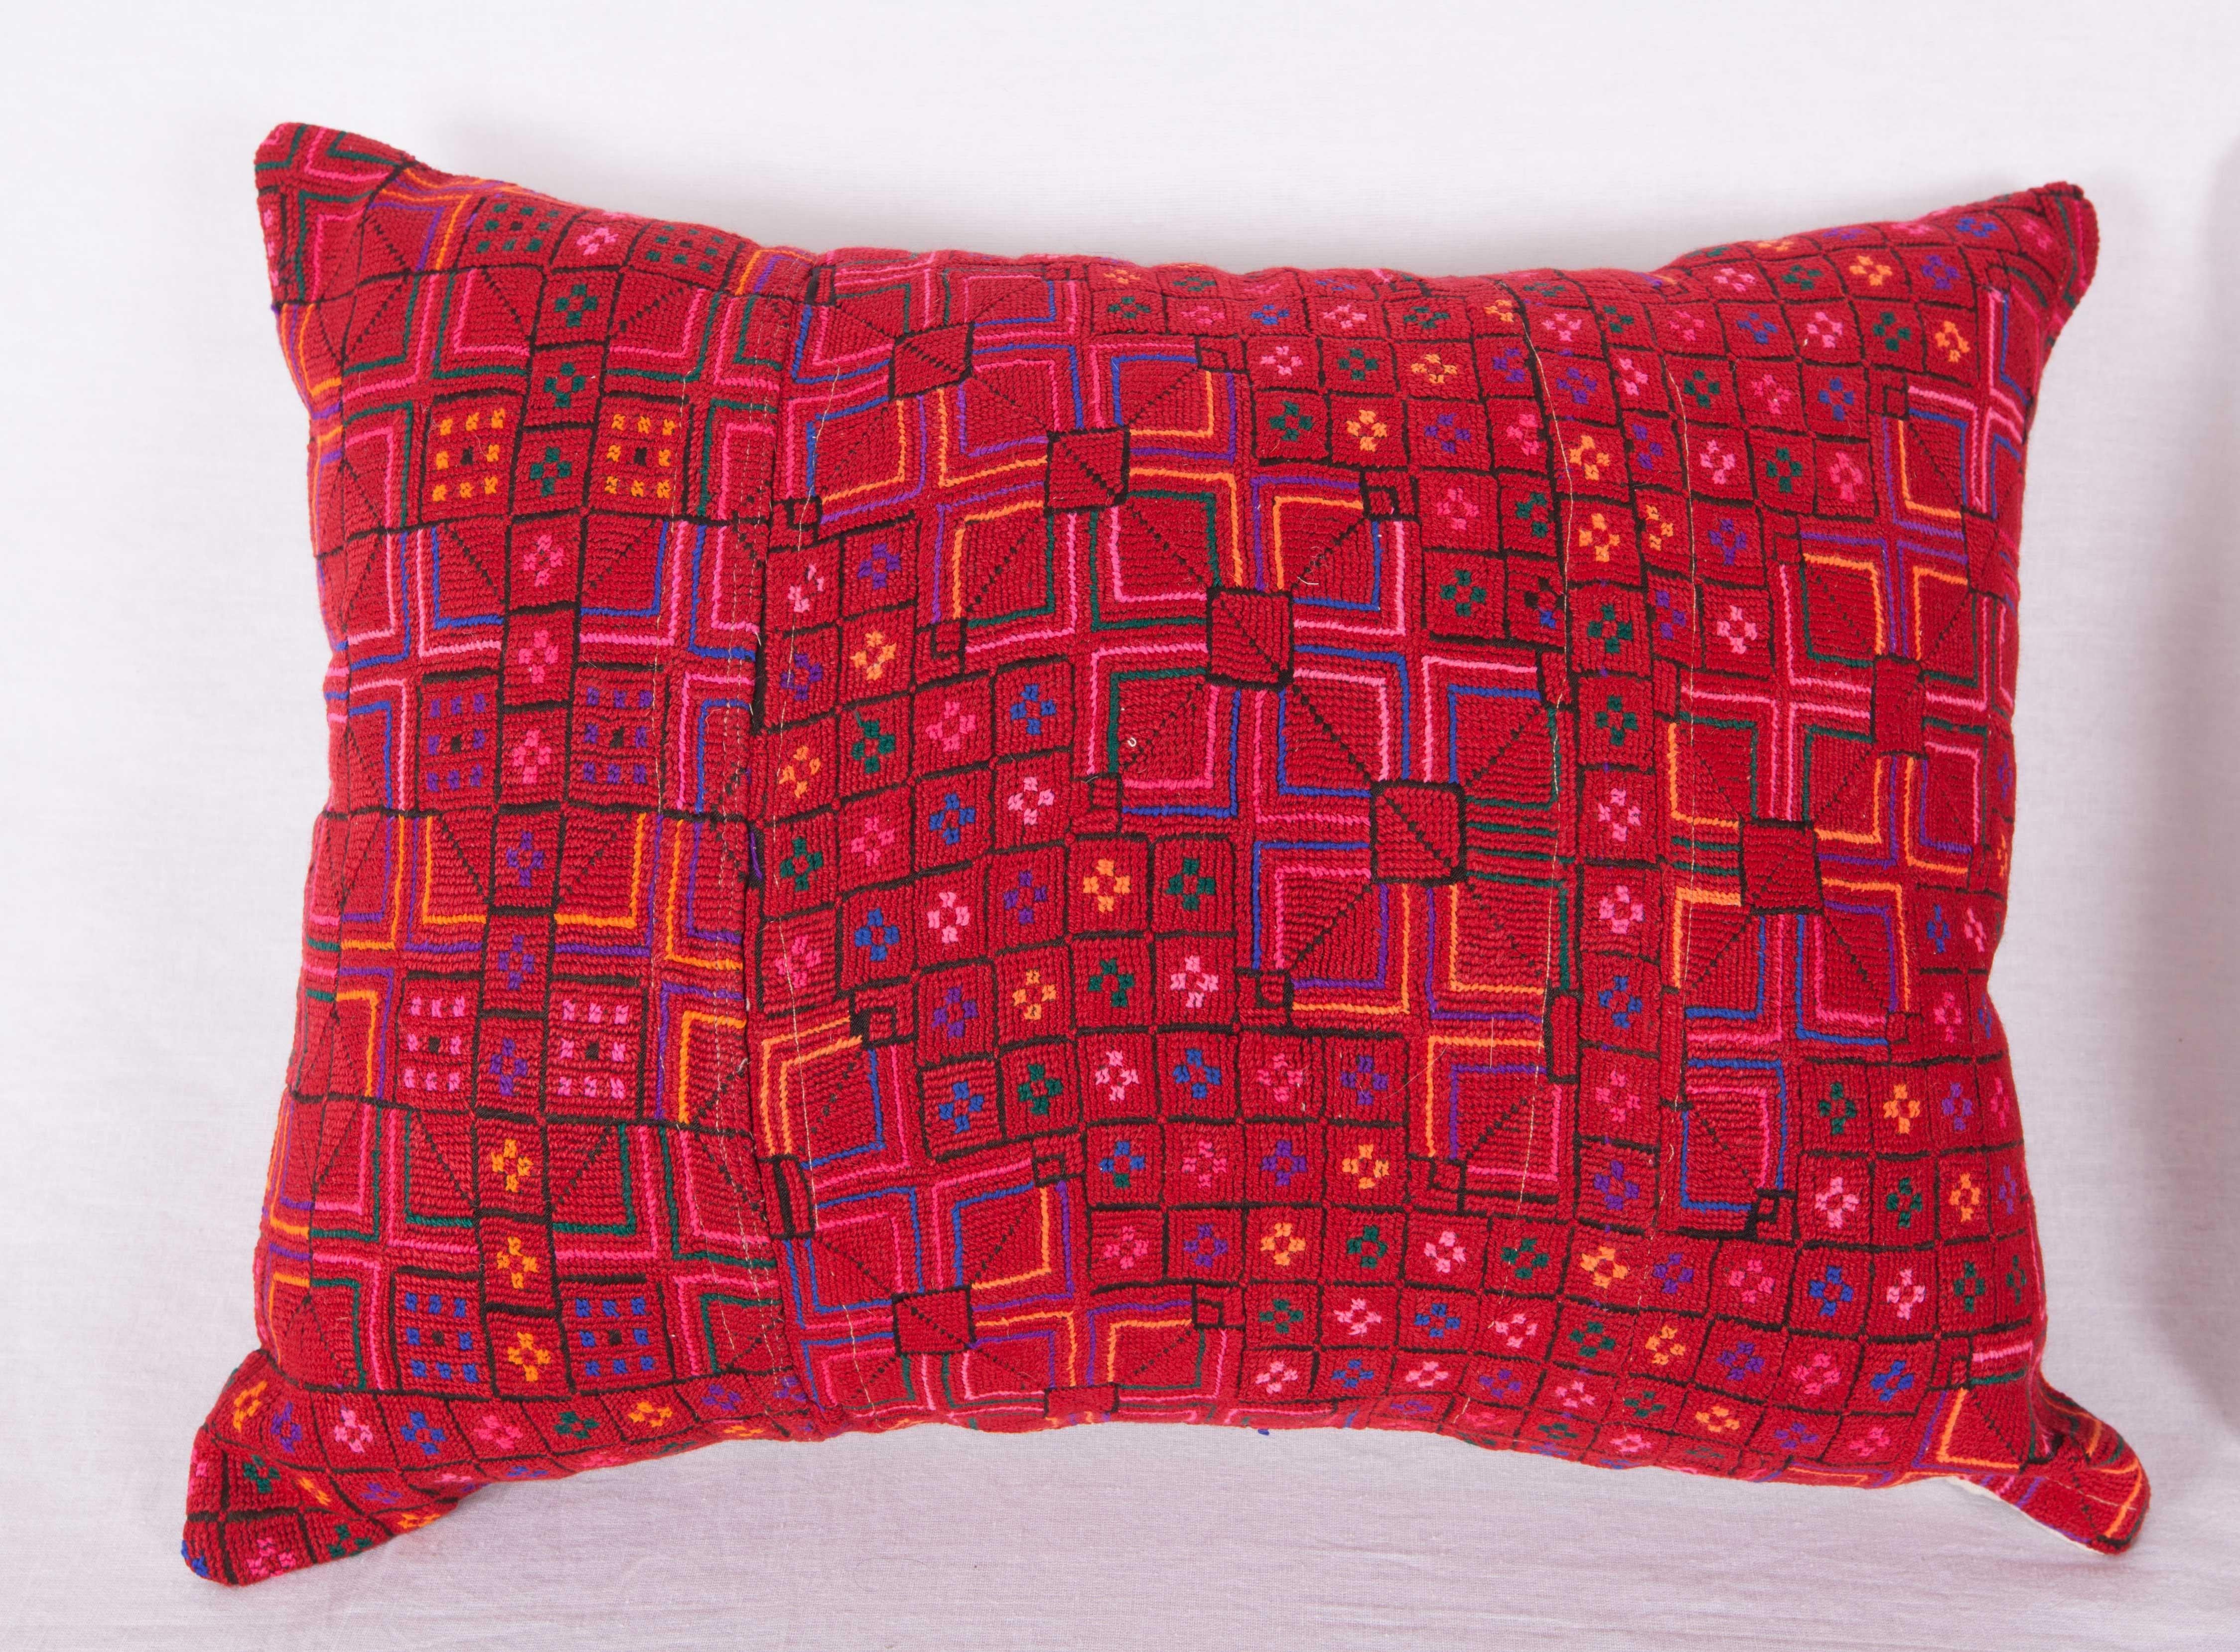 The pillow / cushion covers are made from a vintage Syrian Bedouin embroidery. It does not come with an insert. The backing is made of linen. Please note filling is not provided. Since the item mentioned above is either antique, old, or vintage it